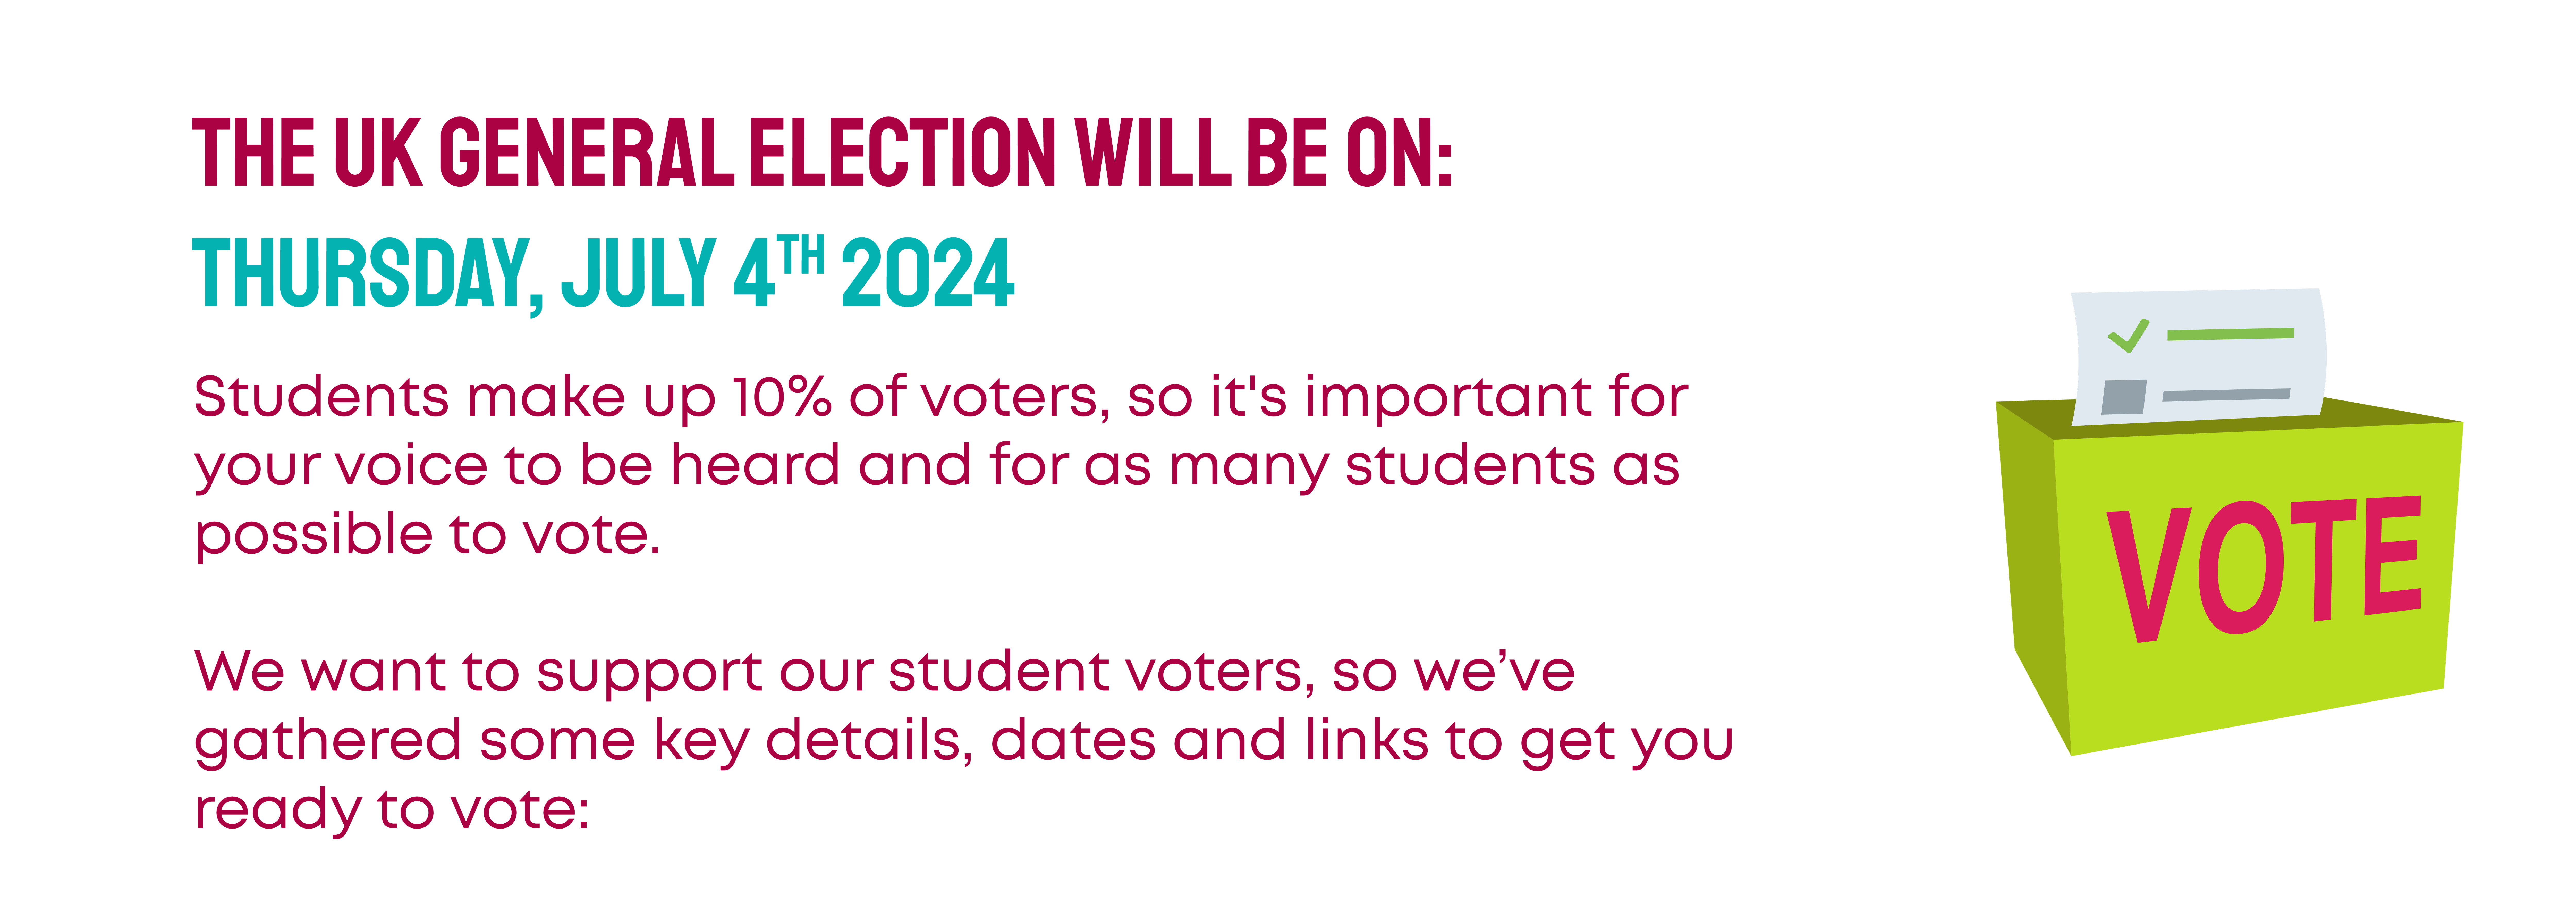 The UK General Election will be on Thursday, July 4th 2024. Students make up 10% of voters, so it's important for  your voice to be heard and for as many students as  possible to vote.  We want to support our student voters, so we’ve  gathered some key details, dates and links to get you ready to vote: 